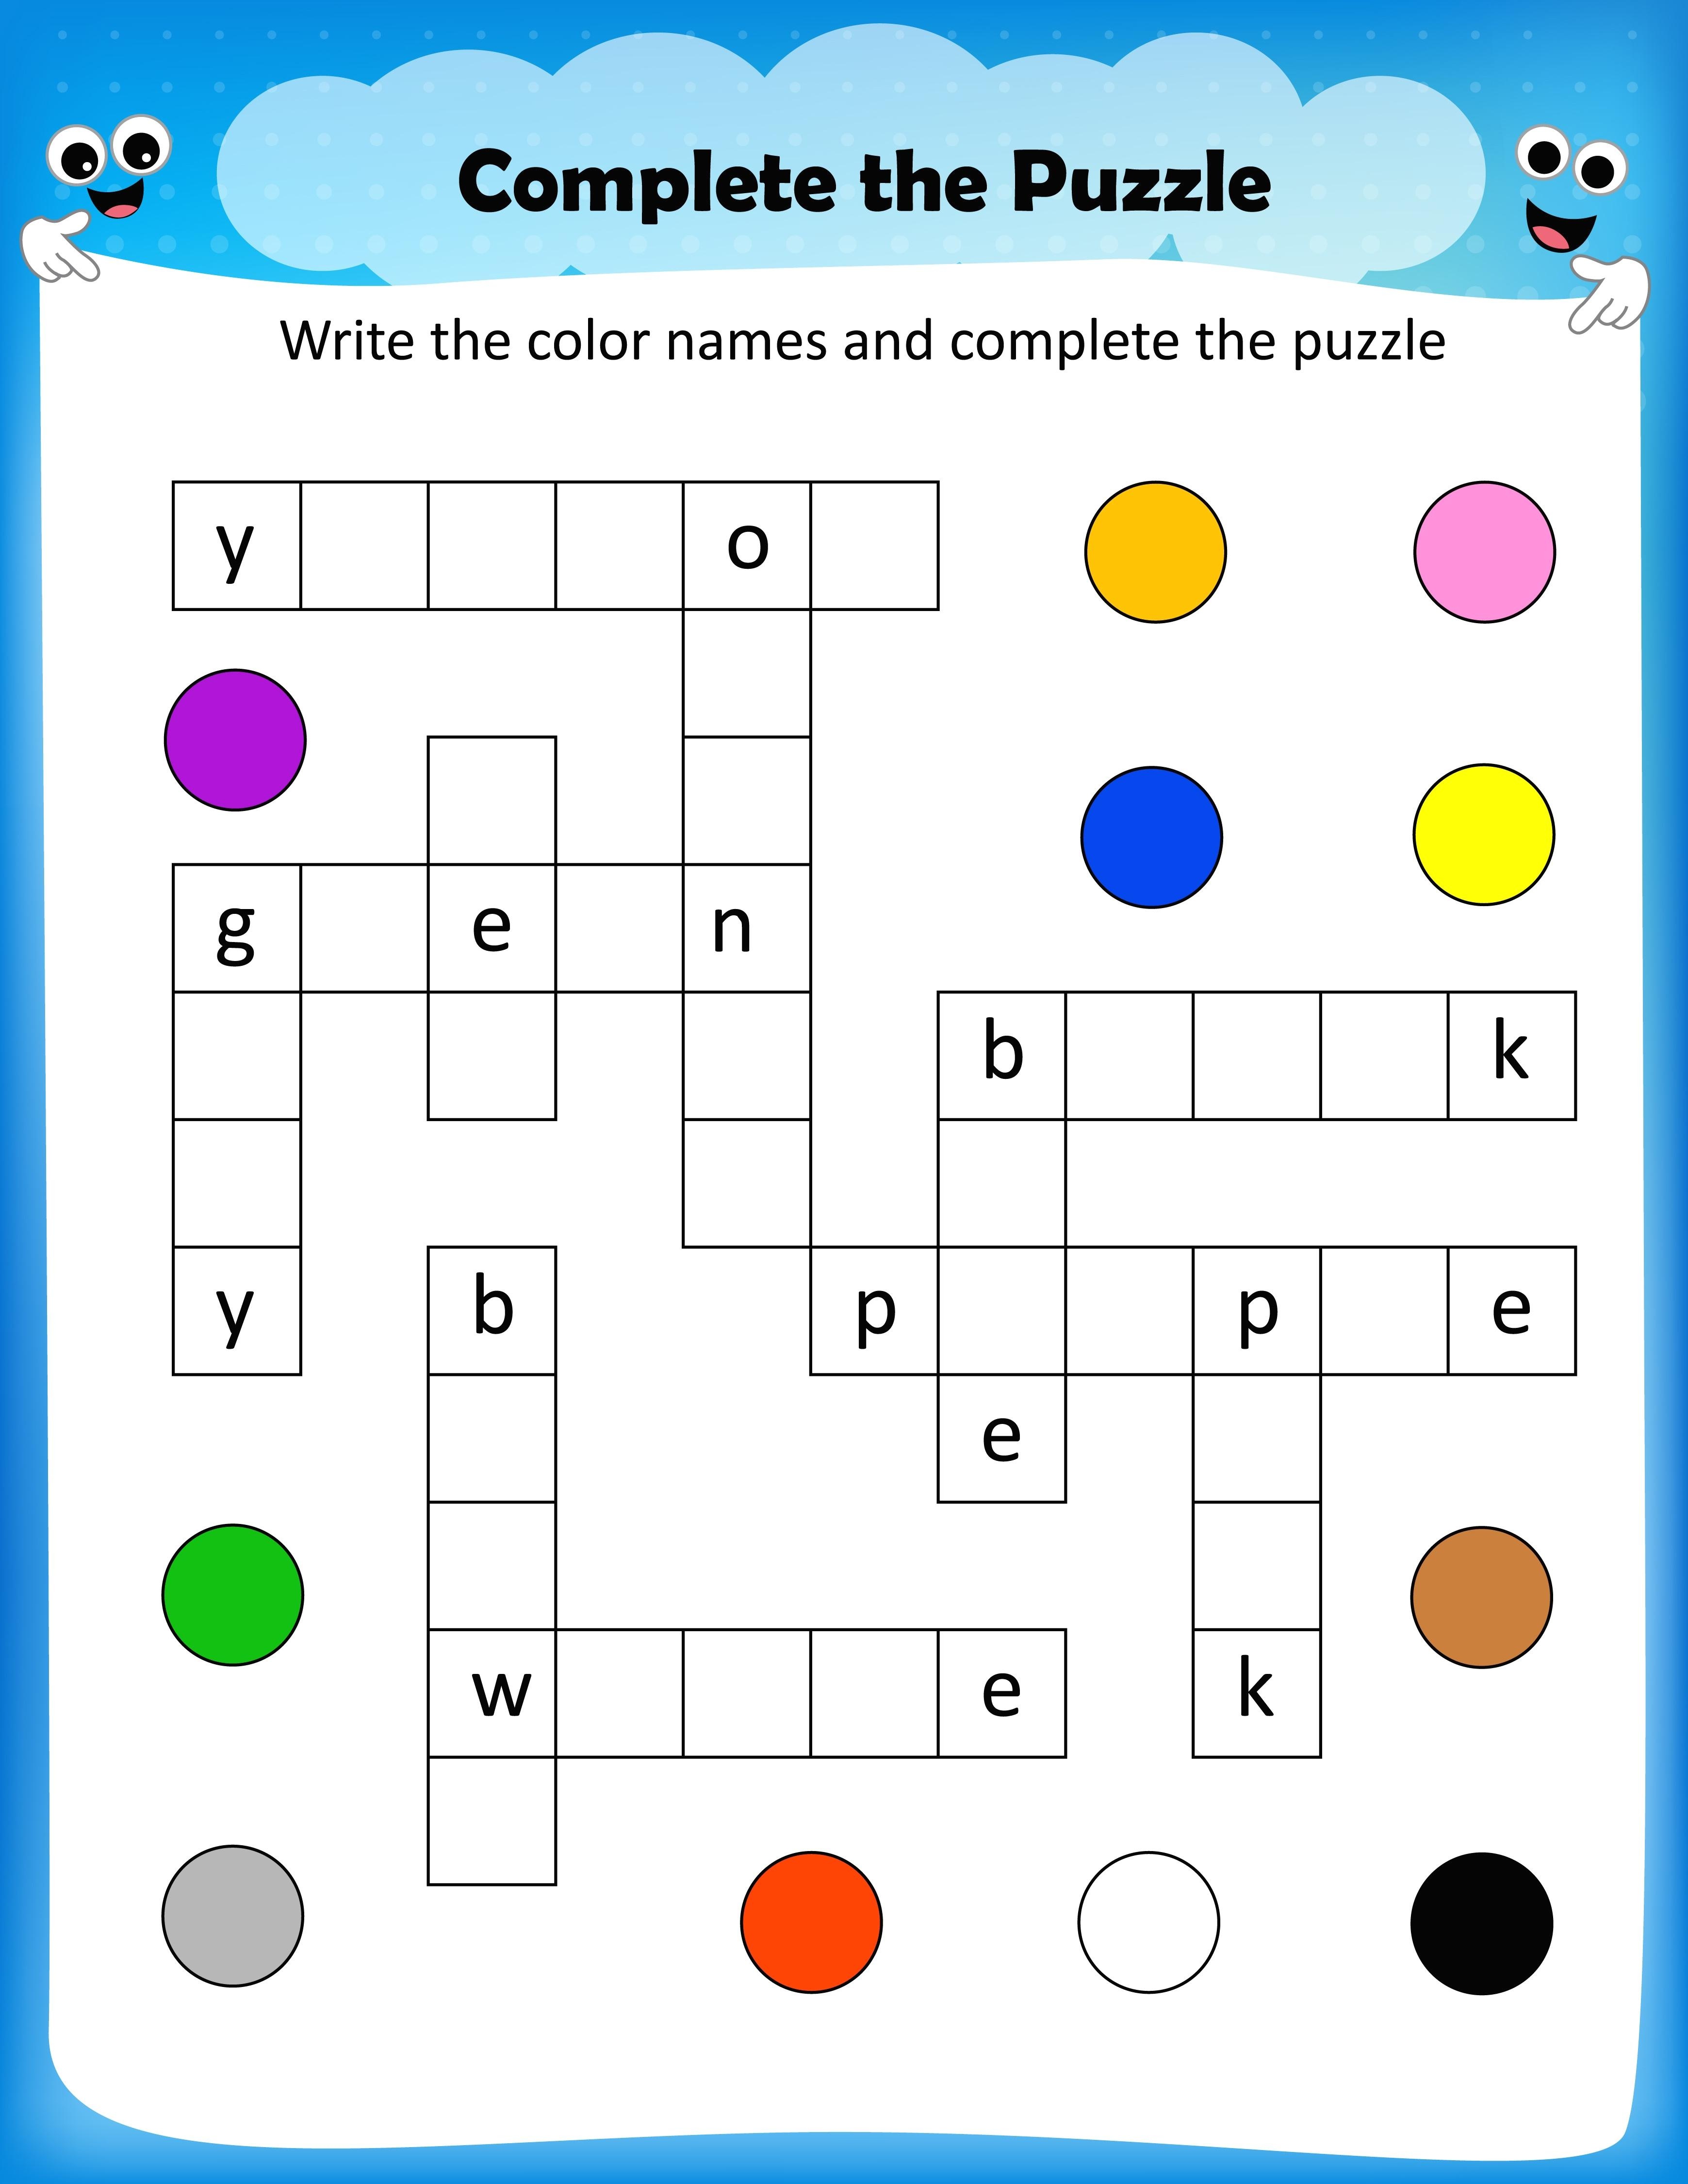 Free Printable Crossword Puzzles For Kids Free Printable Crosswords - Free Printable Puzzles For Kids